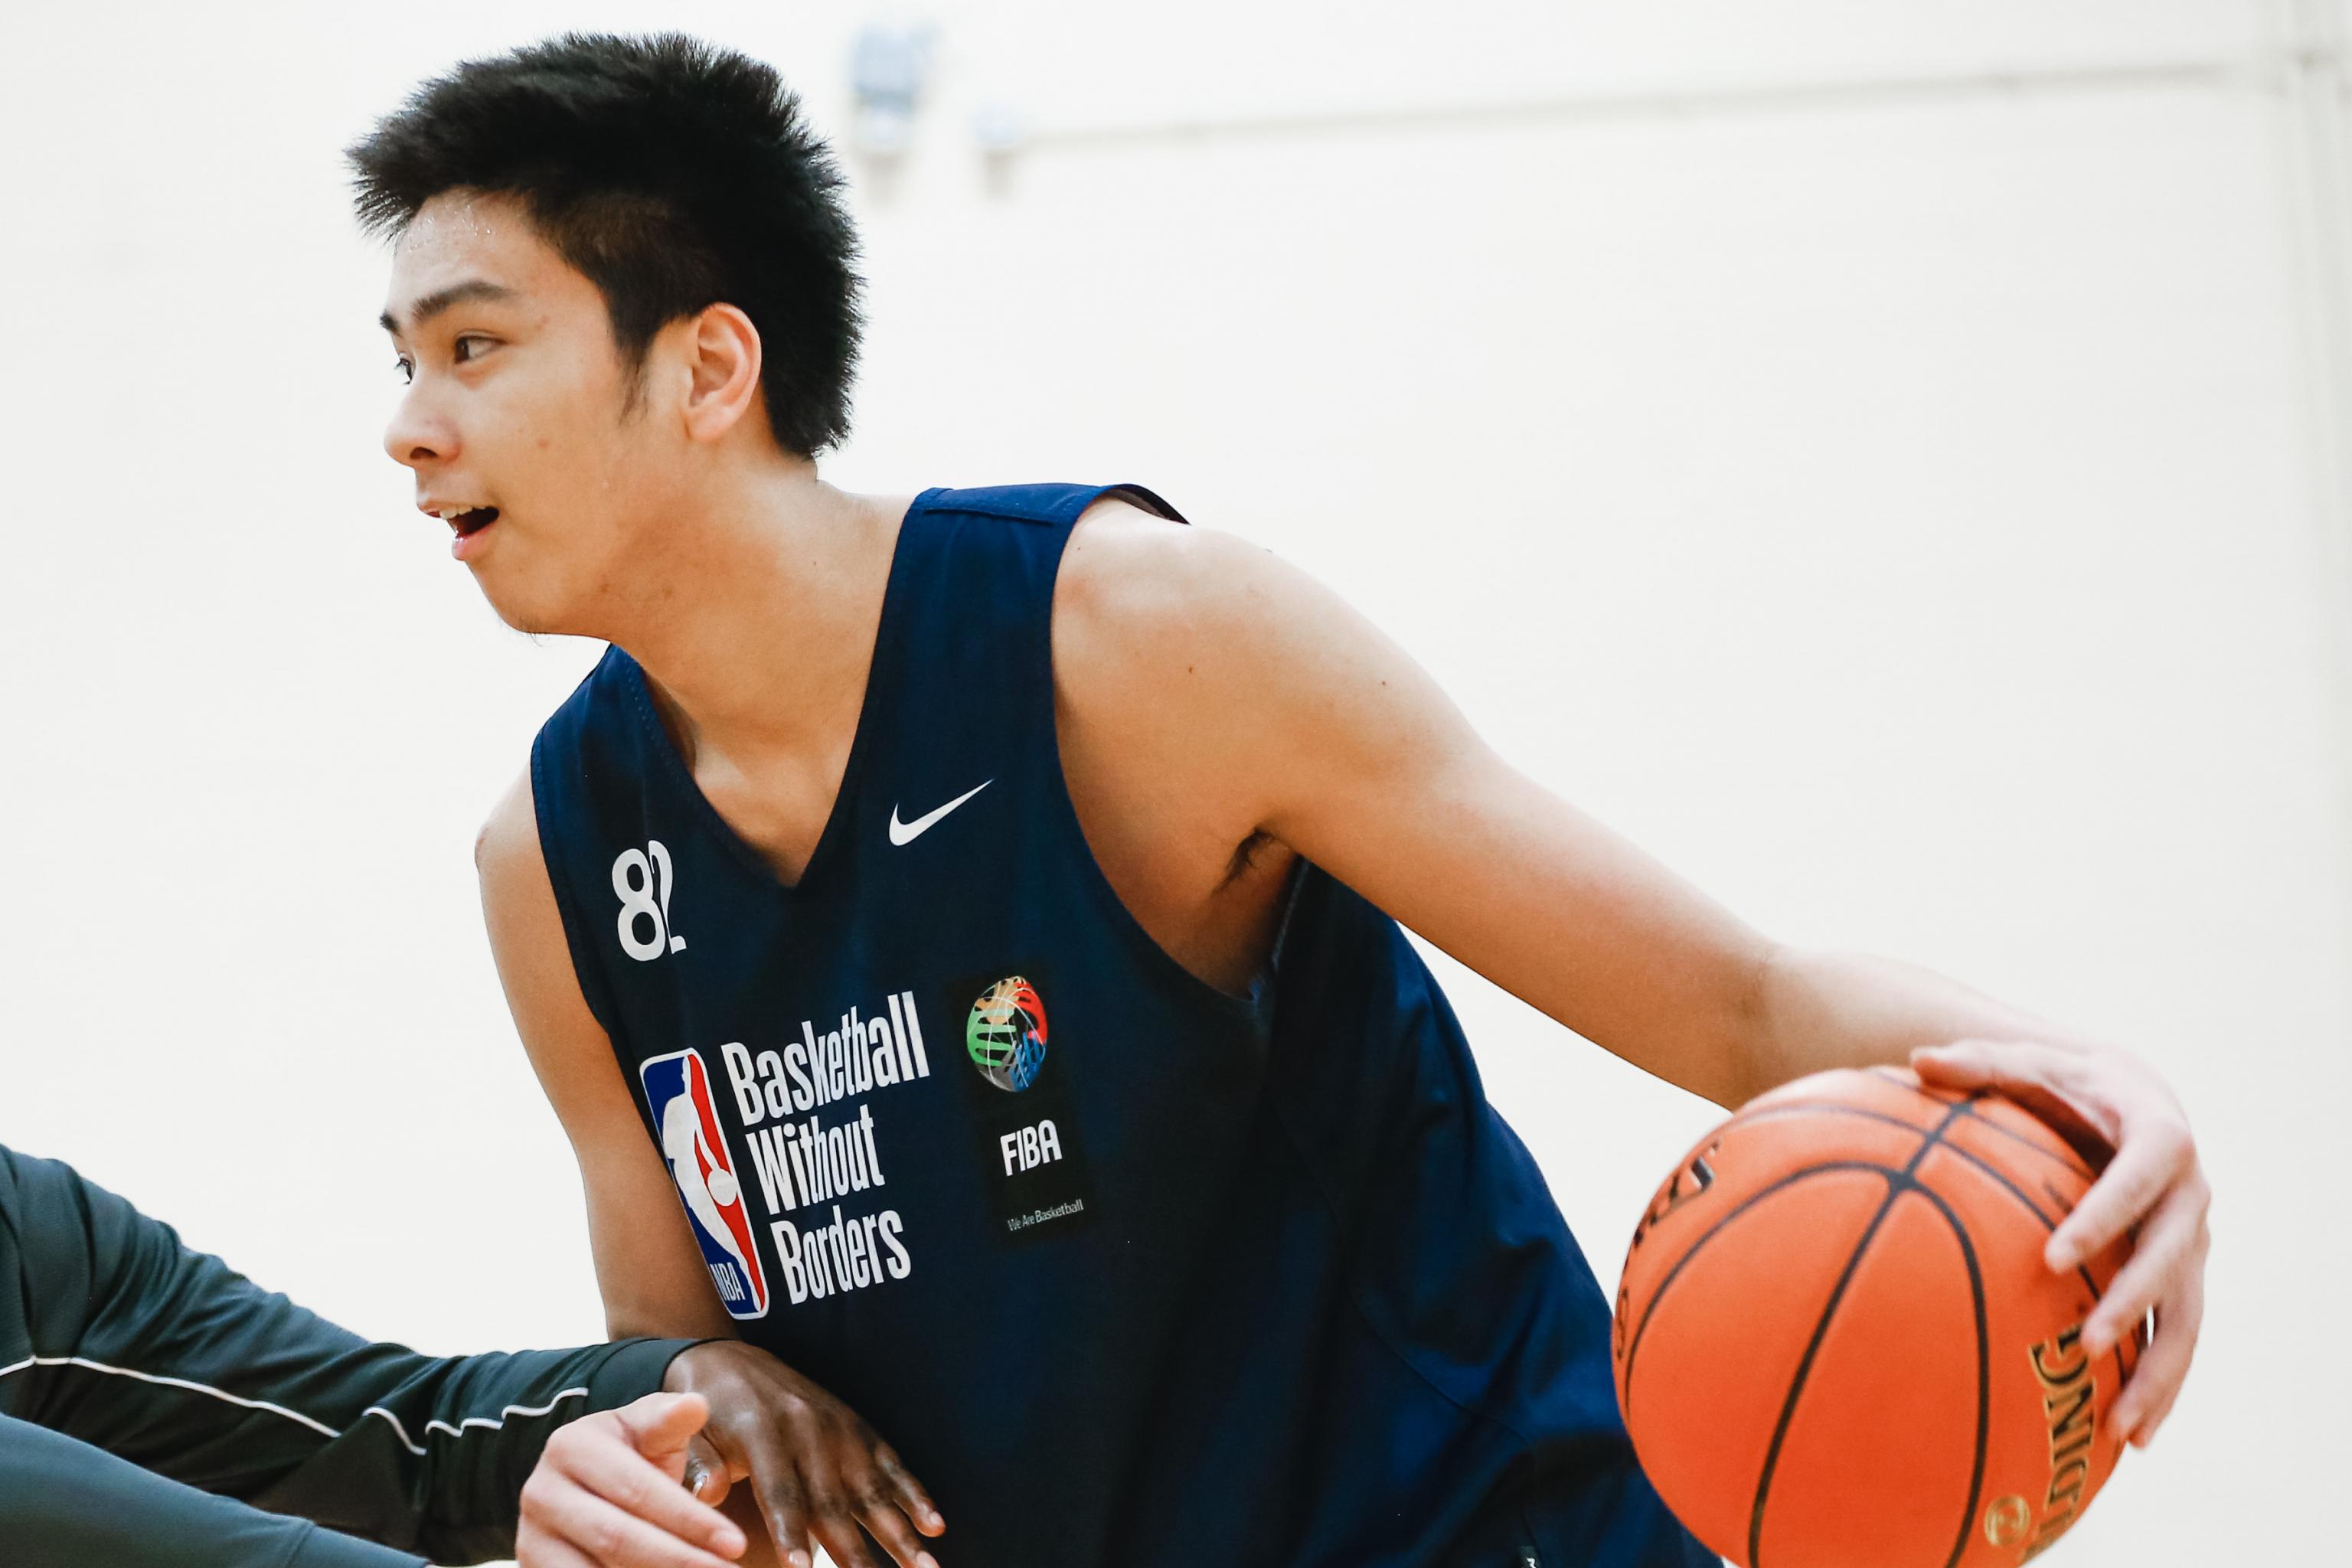 Kai Sotto's jersey among NBL's top sellers